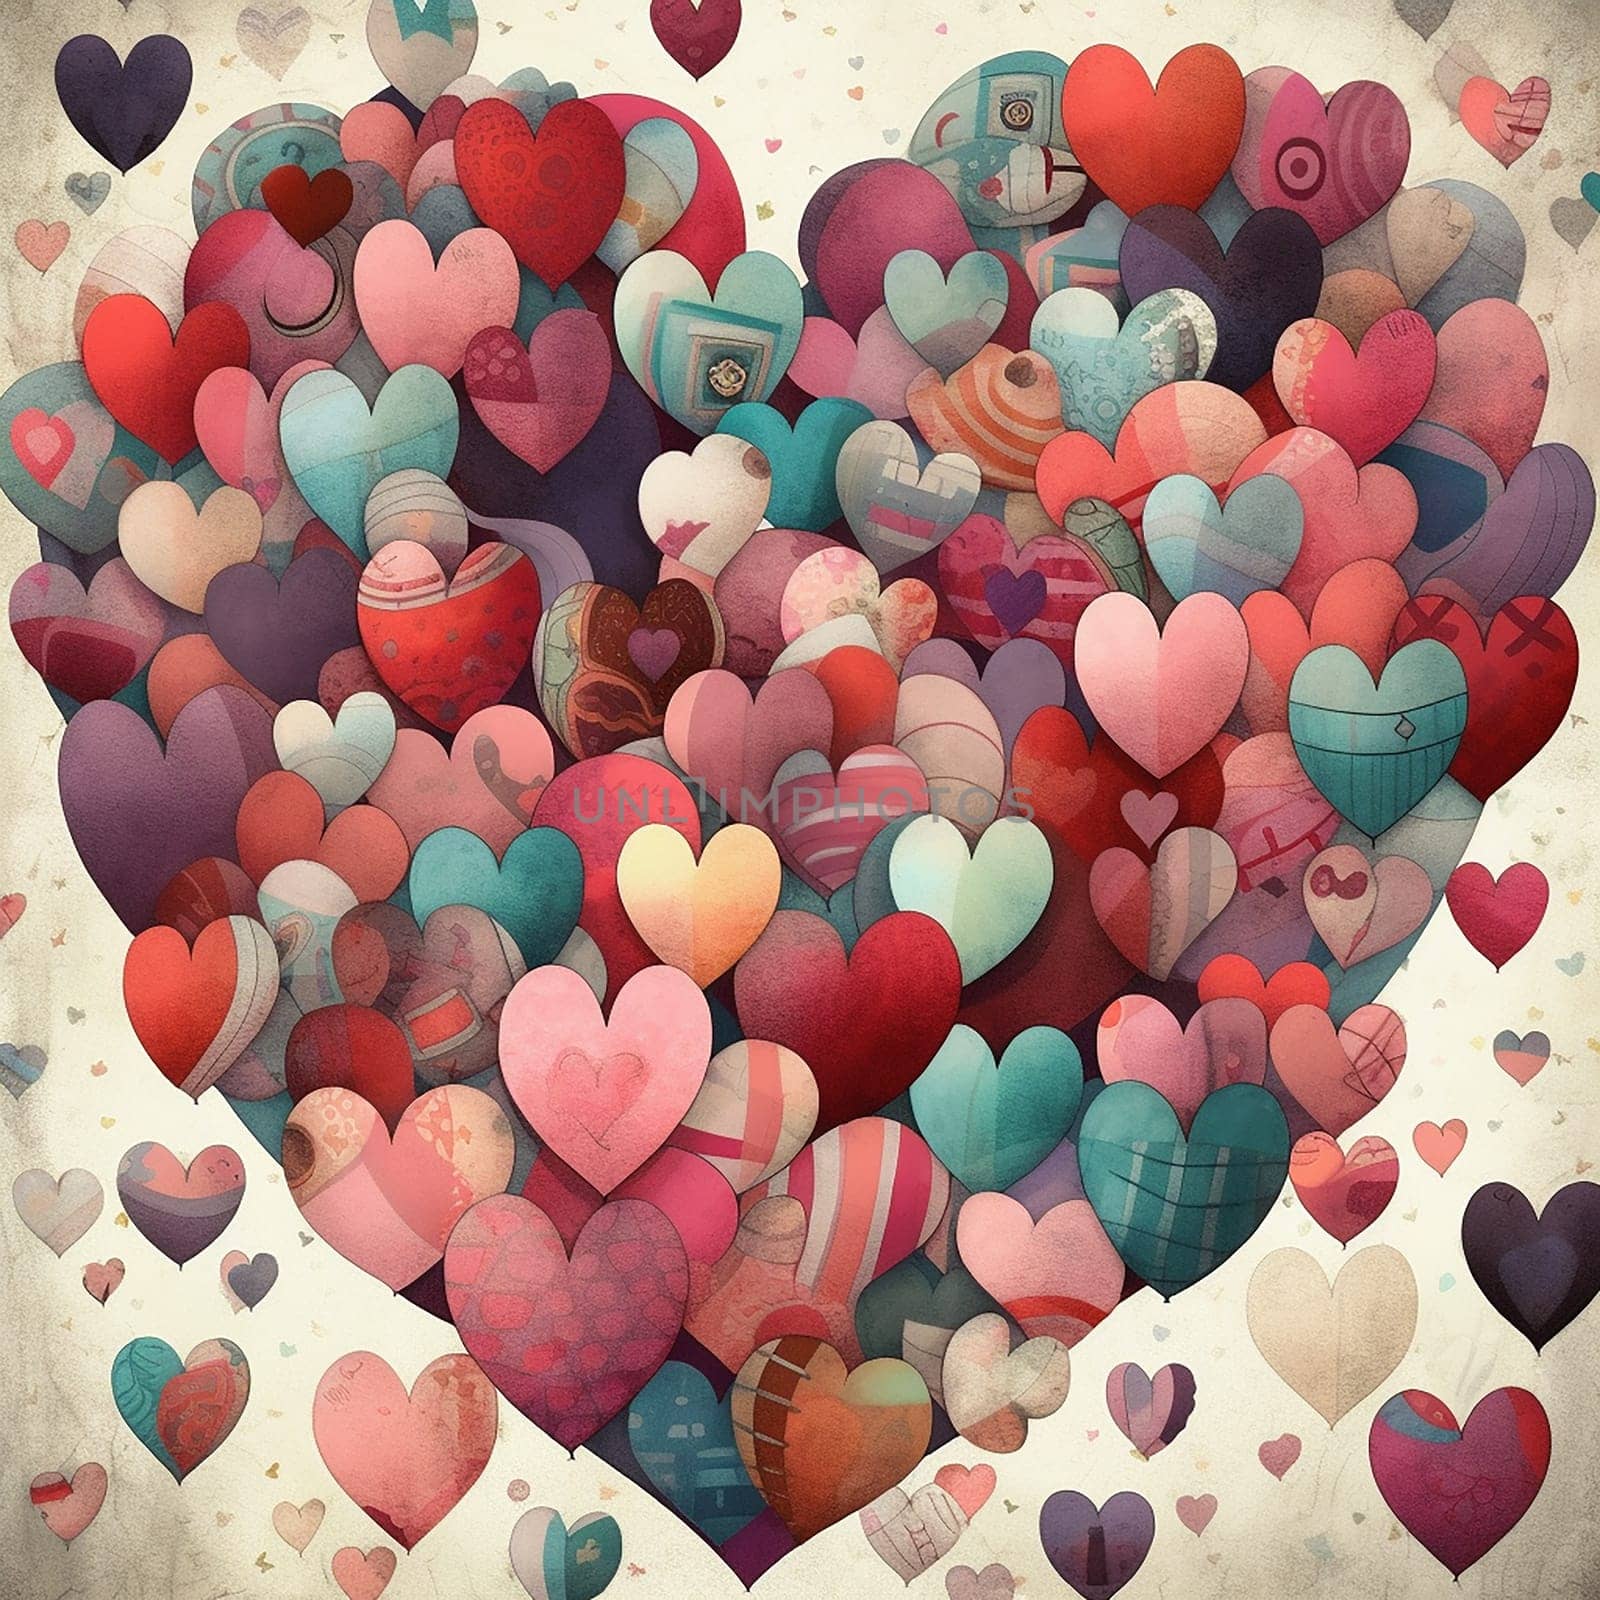 Vintage-style heart collage in various colors and patterns. by Hype2art